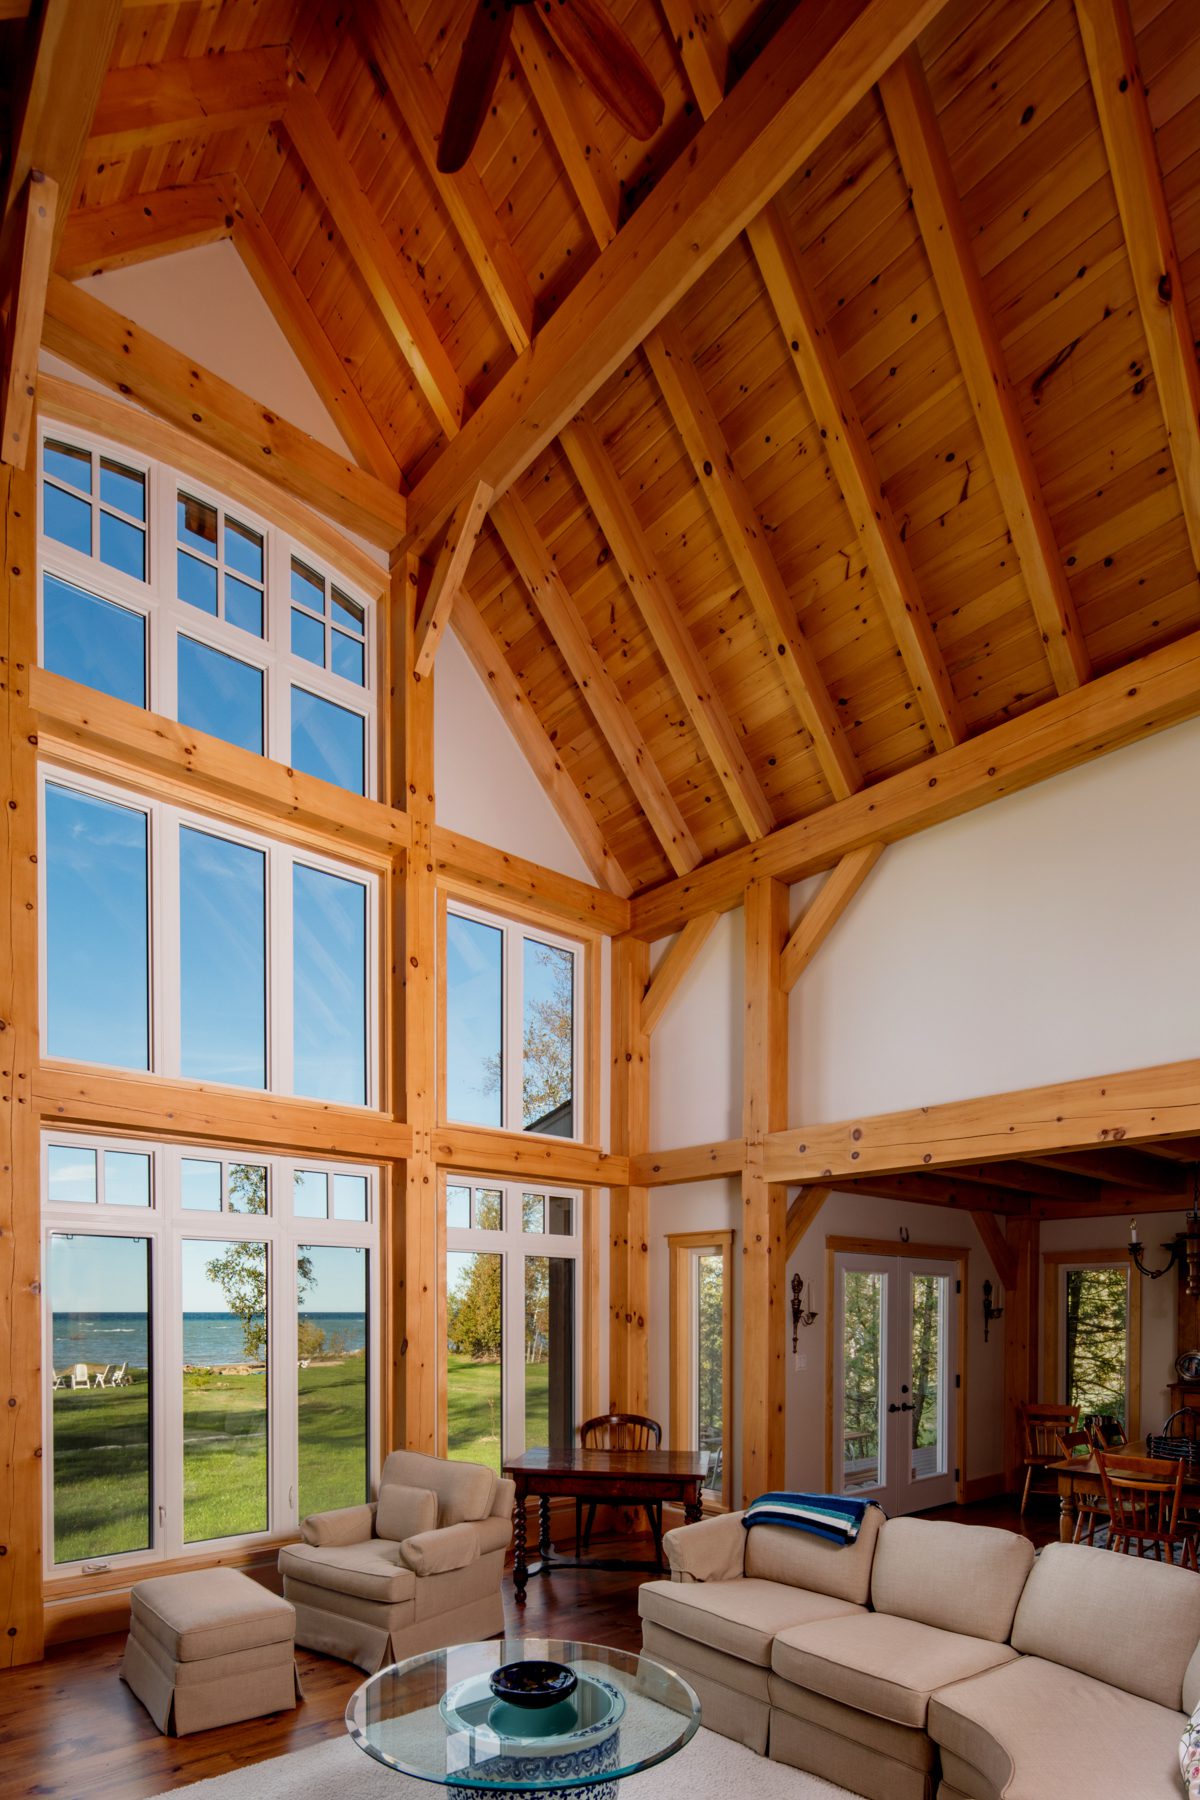 8-Normerica-Timber-Frame-Interior-Cottage-Living-Room-Great-Room-Cathedral-Ceiling-View-of-the-Lake.jpg